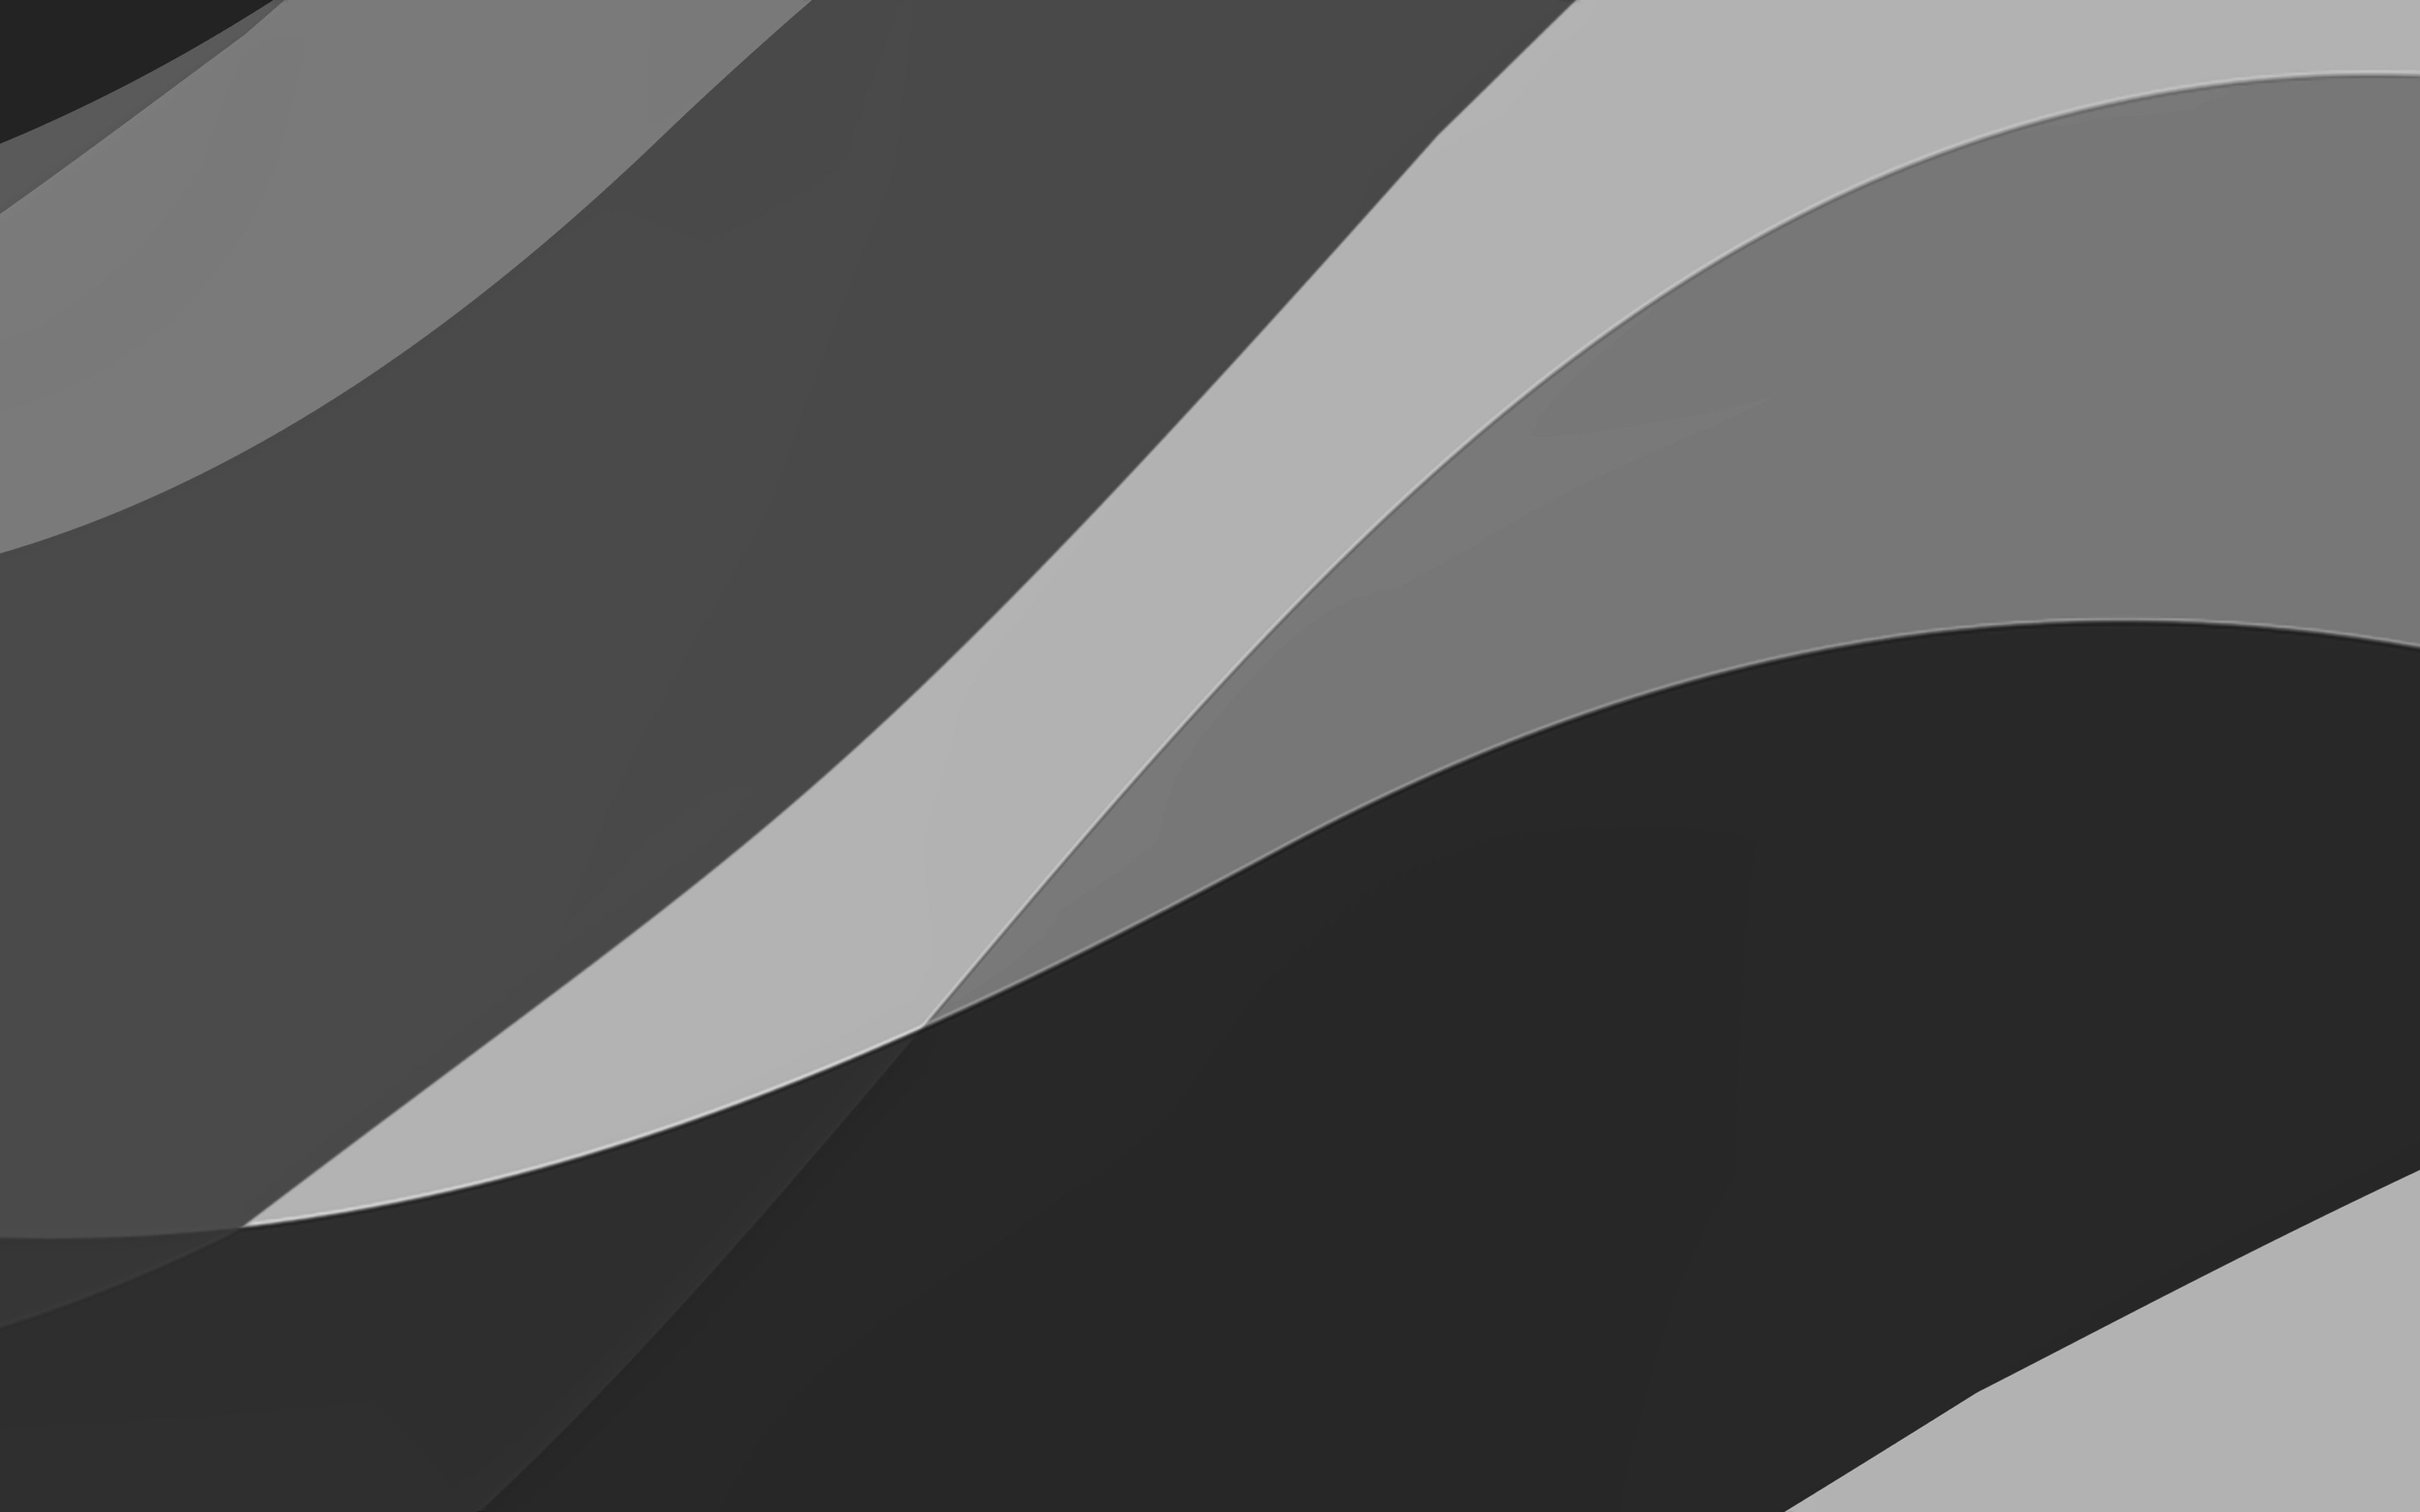 Download wallpaper black abstract waves, 4k, minimal, black wavy background, material design, abstract waves, black background, creative, waves patterns for desktop with resolution 3840x2400. High Quality HD picture wallpaper